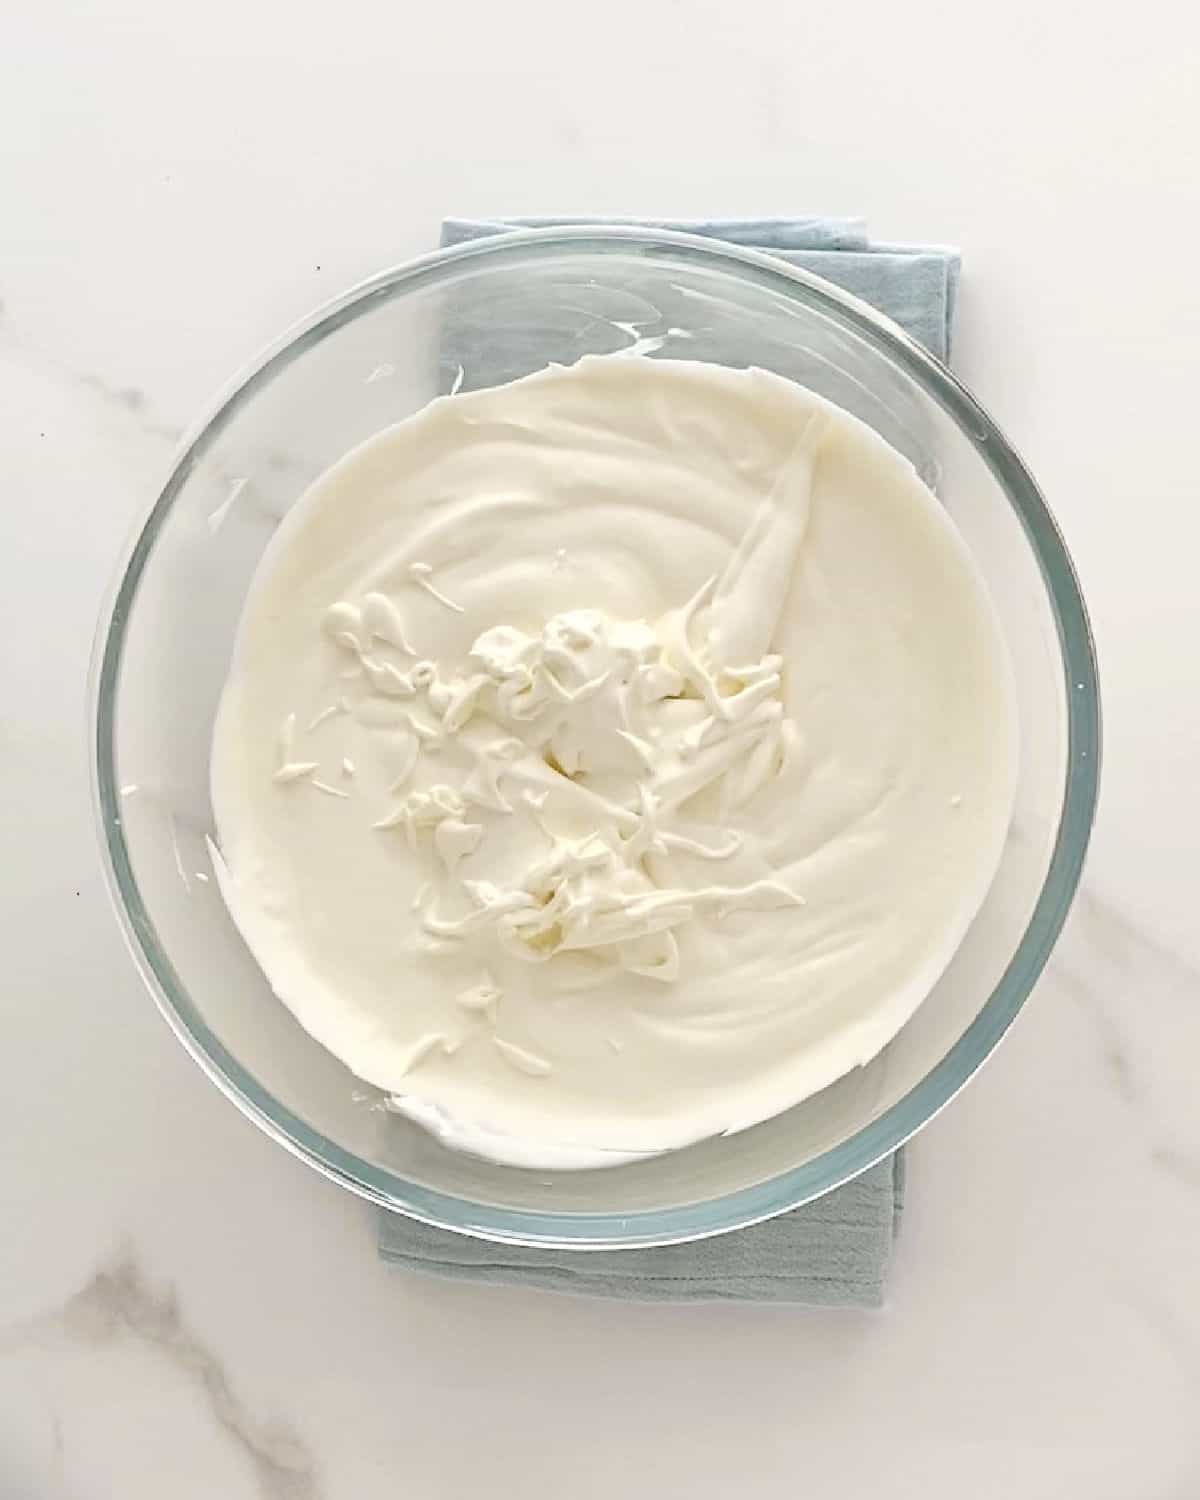 Glass bowl with whipped cream on a light blue cloth on a white marble surface.